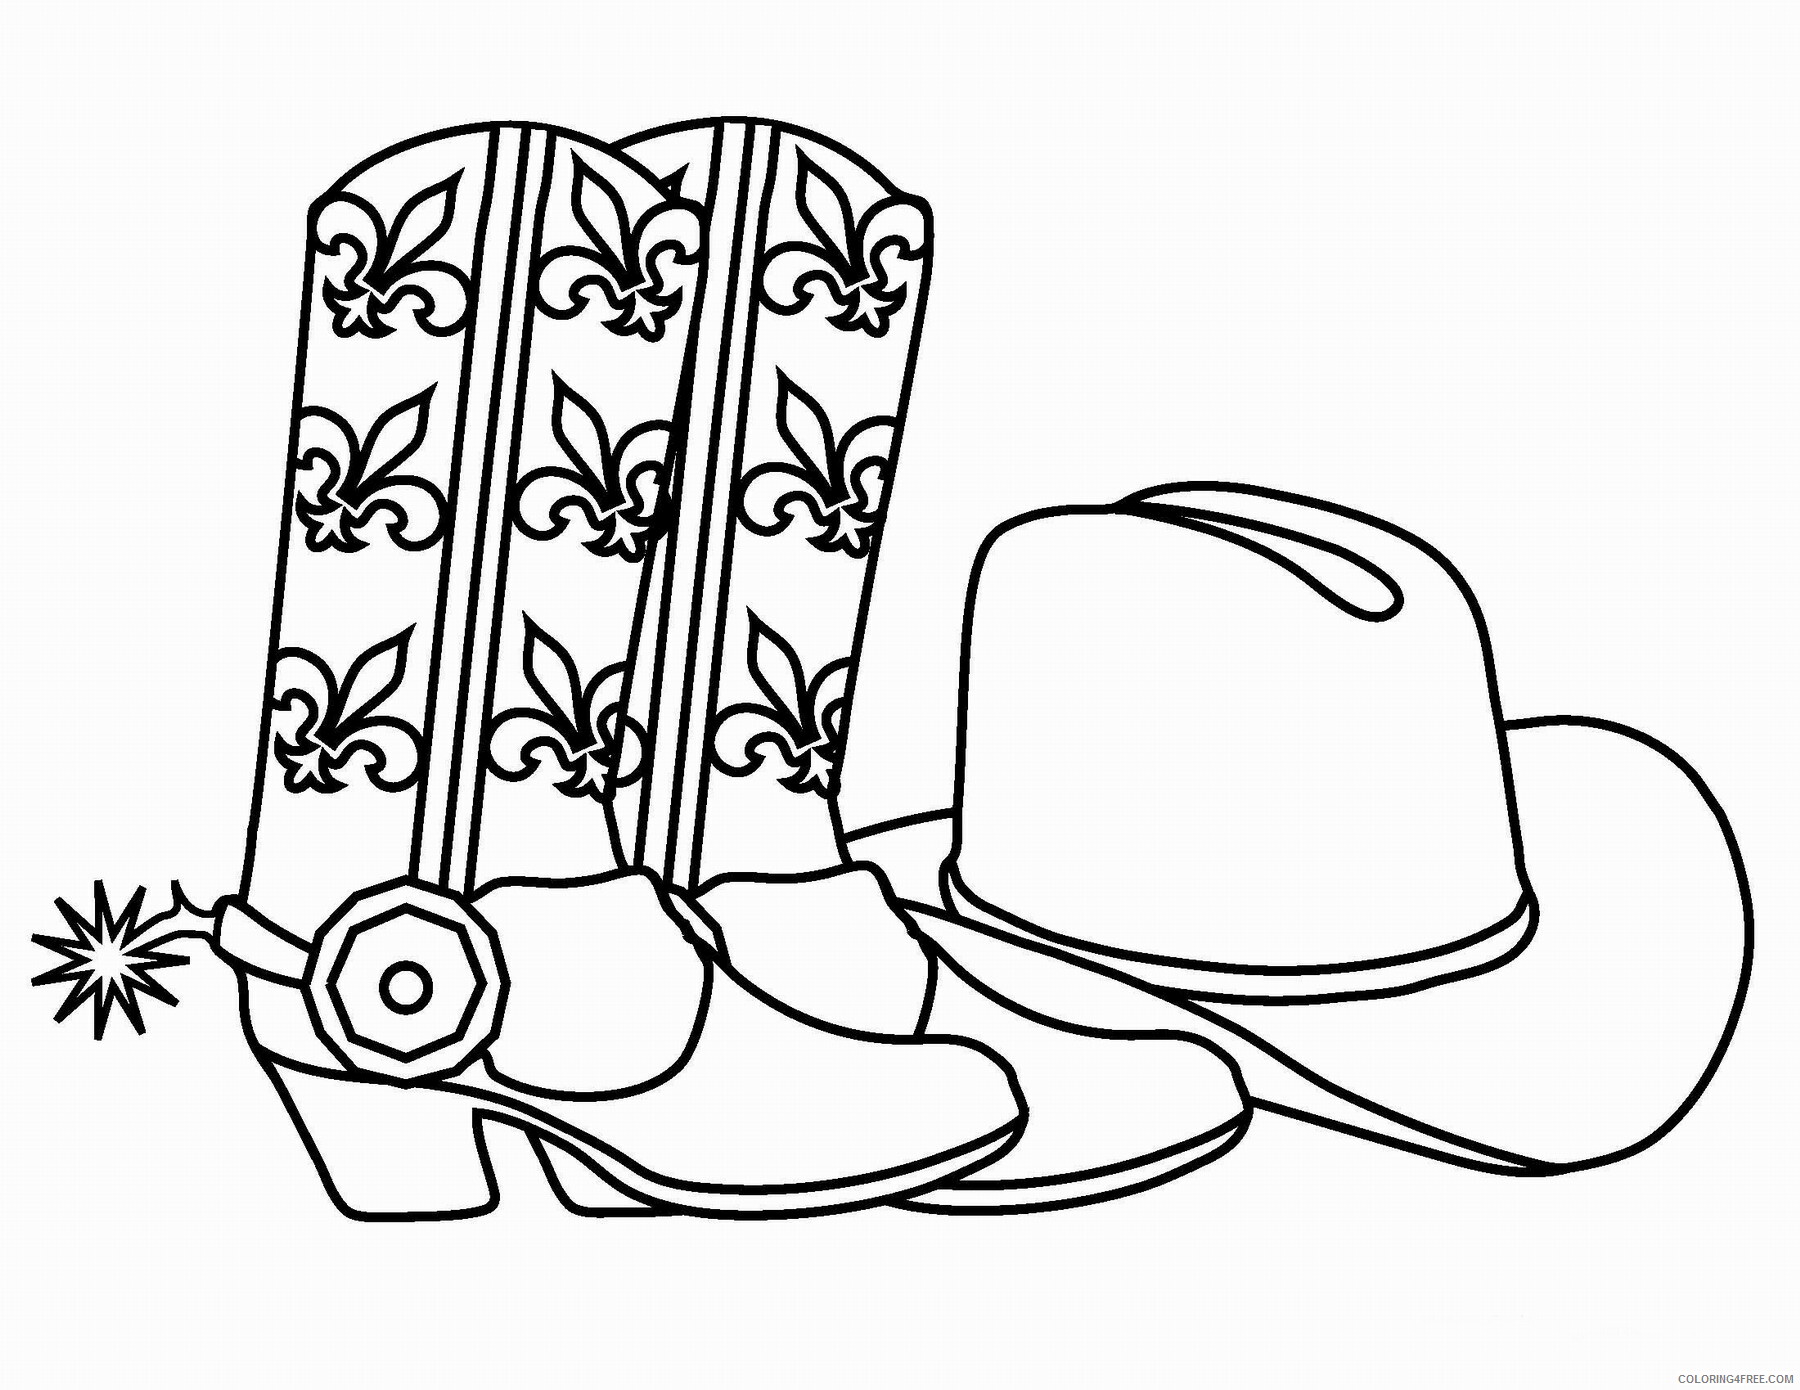 Cowboy Coloring Pages for boys cowboy_04 Printable 2020 0182 Coloring4free